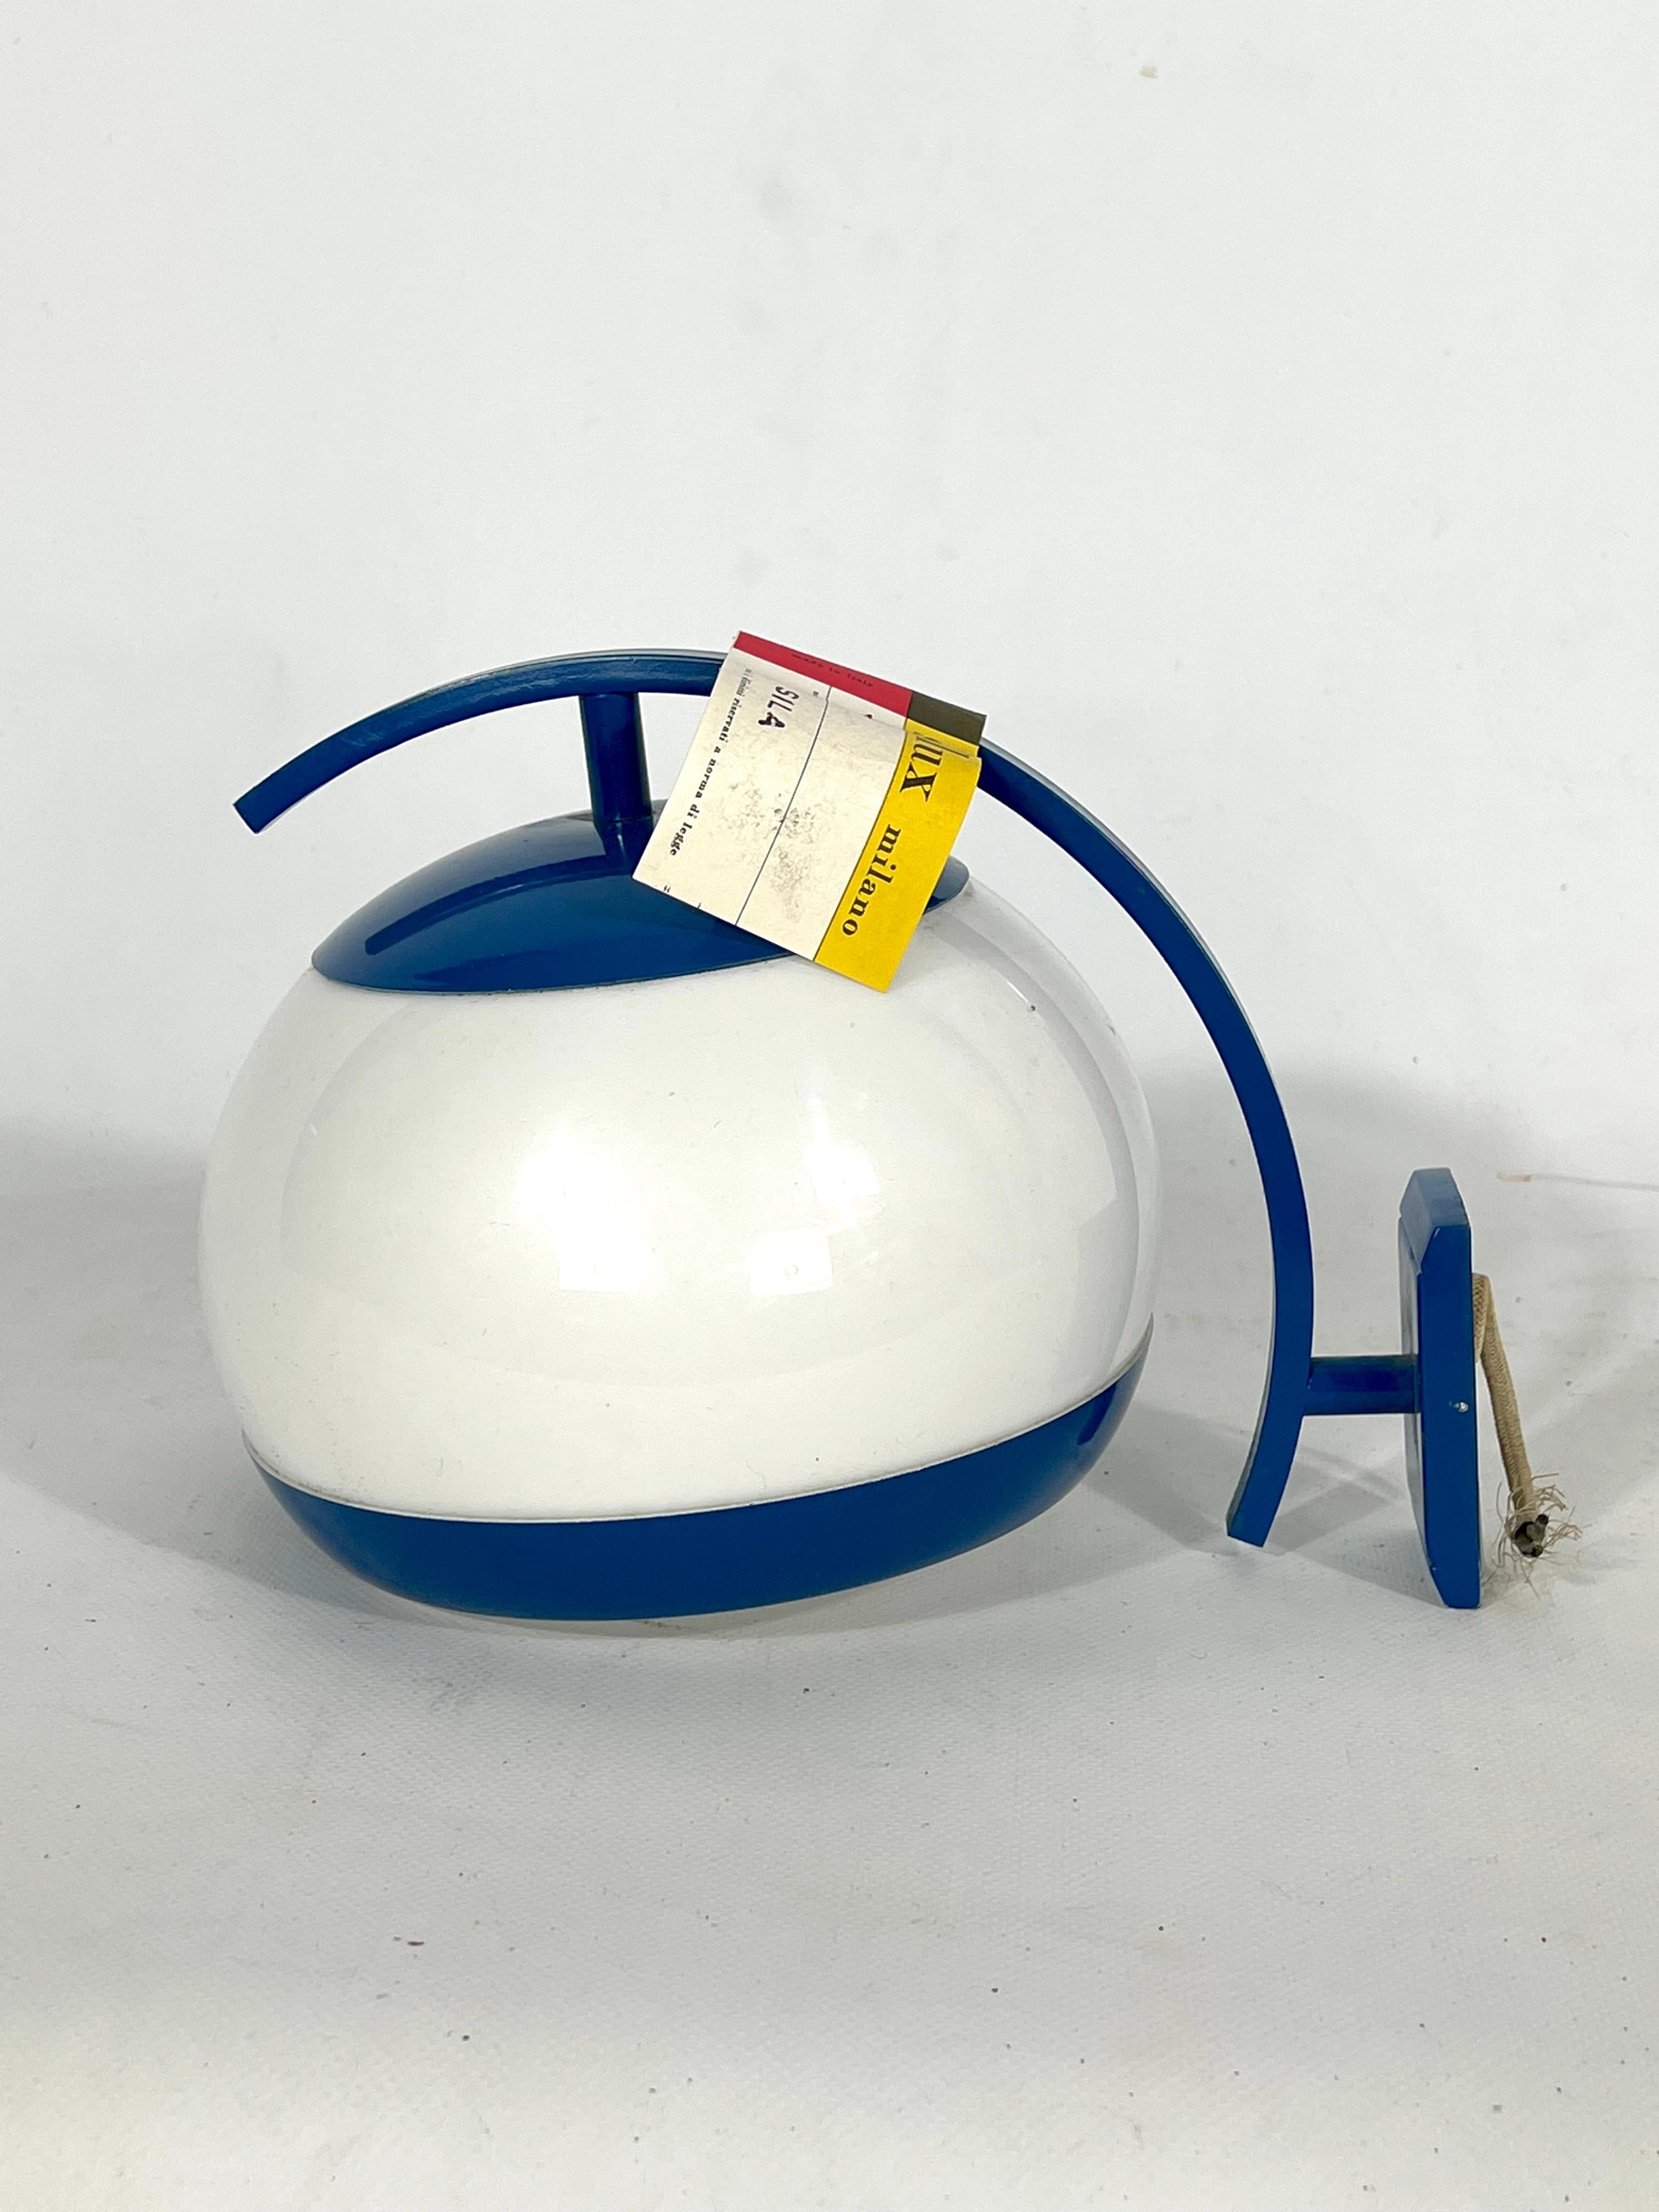 Stilux Milano, Single Blu Lacquer and Perspex Wall Lamp Model Sila, Italy, 1960s For Sale 1